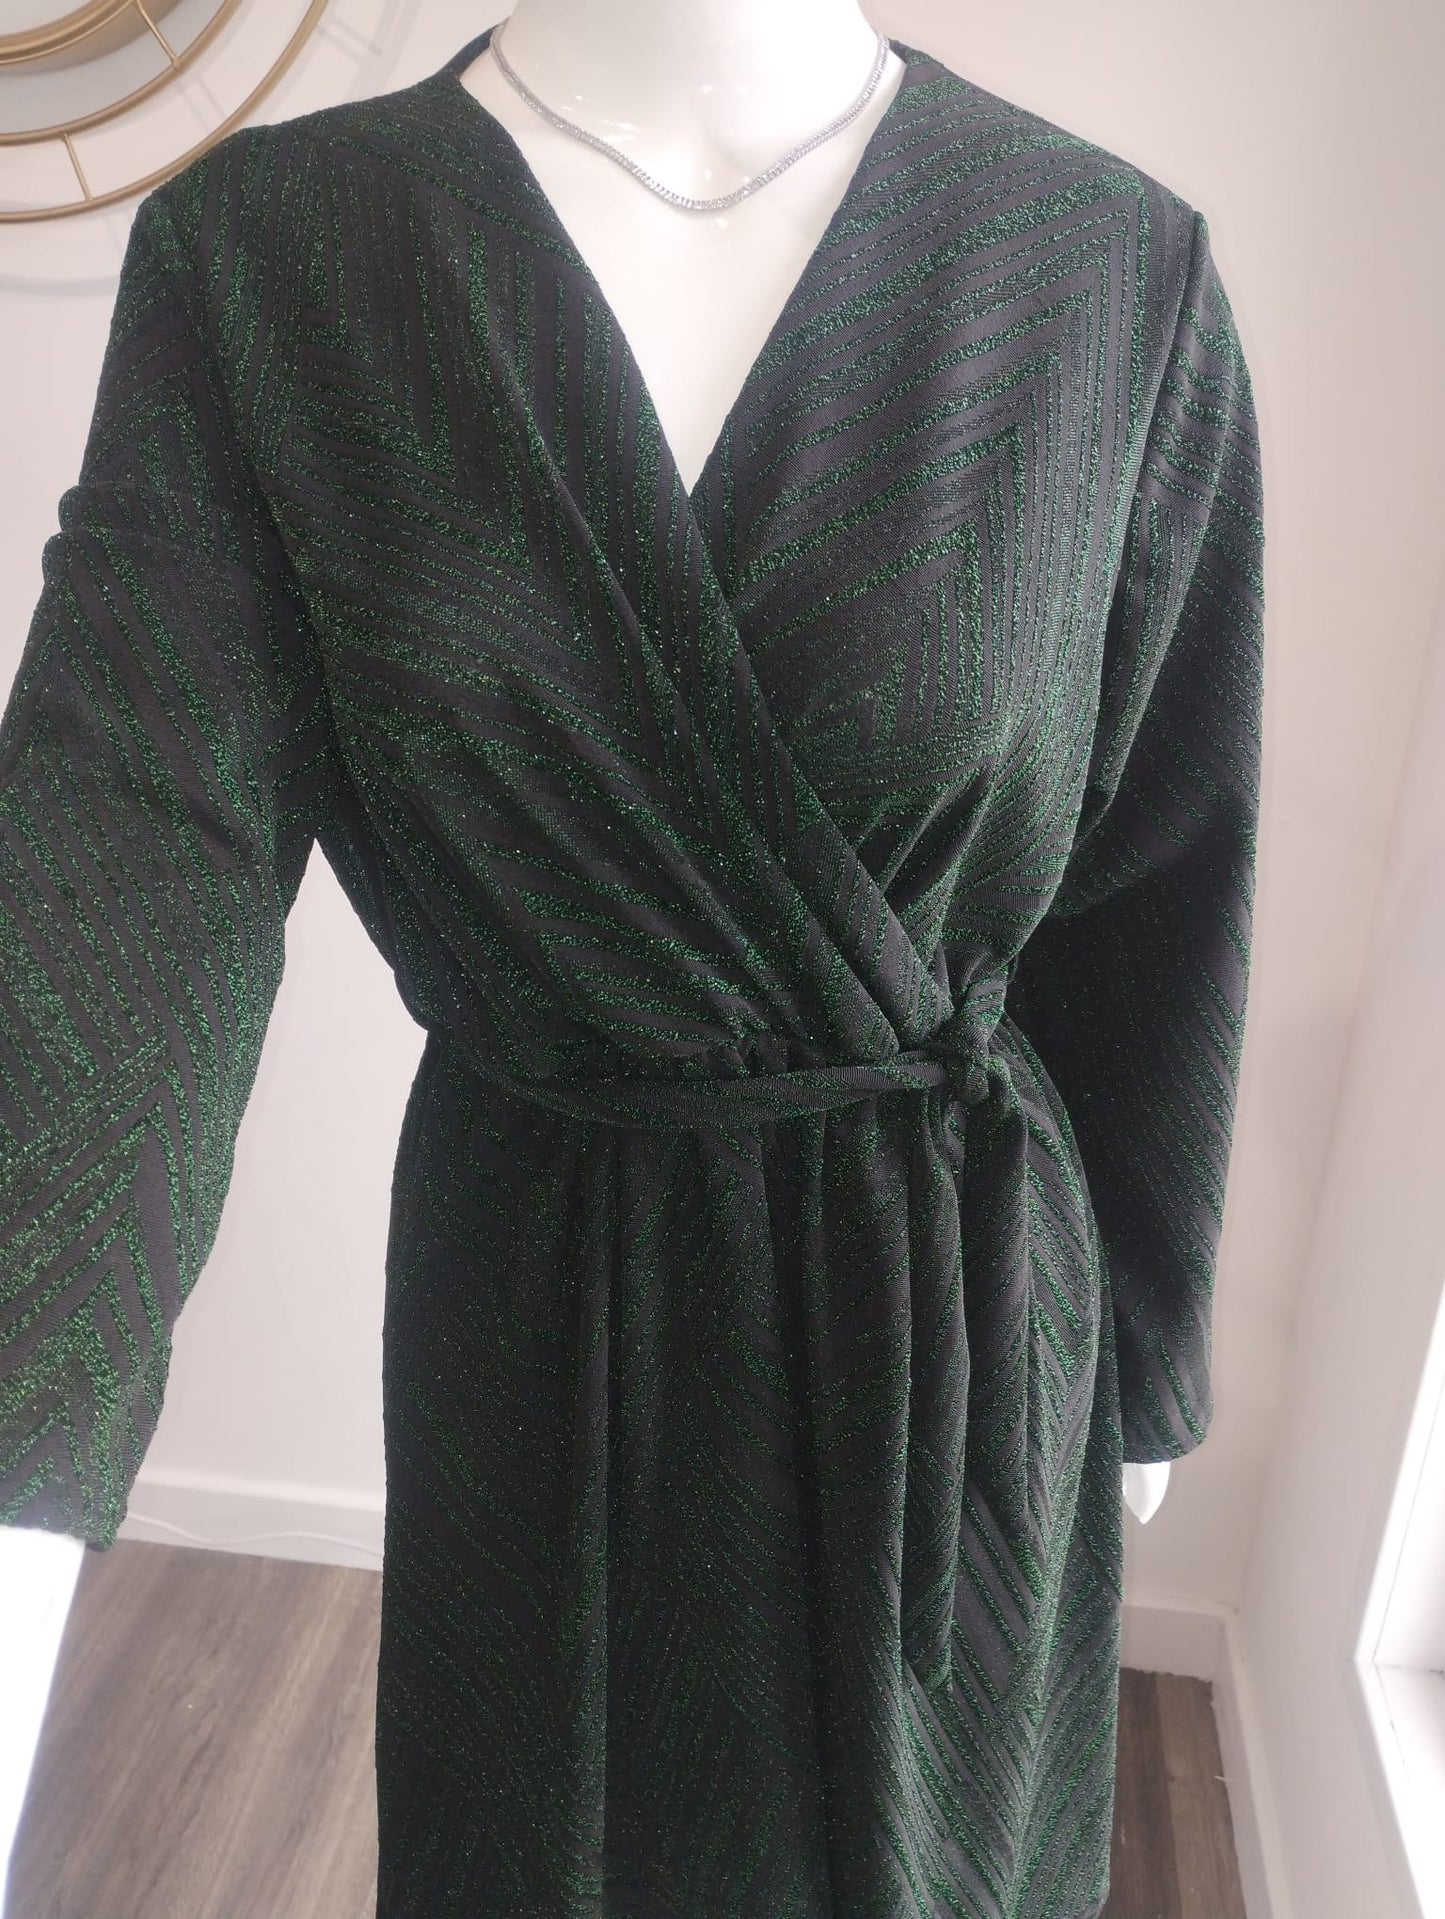 Green and black dress